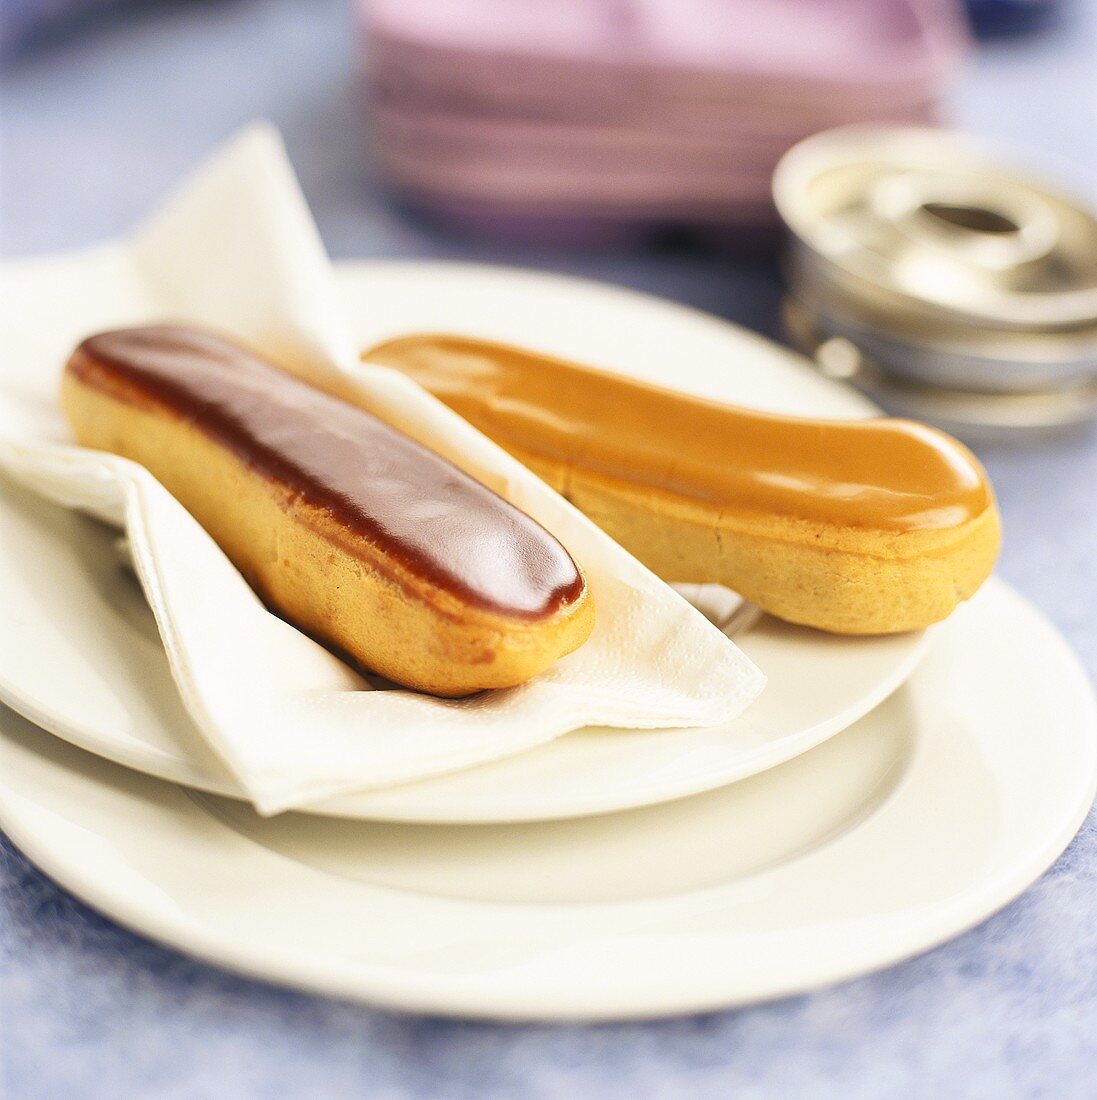 Two éclairs on plate